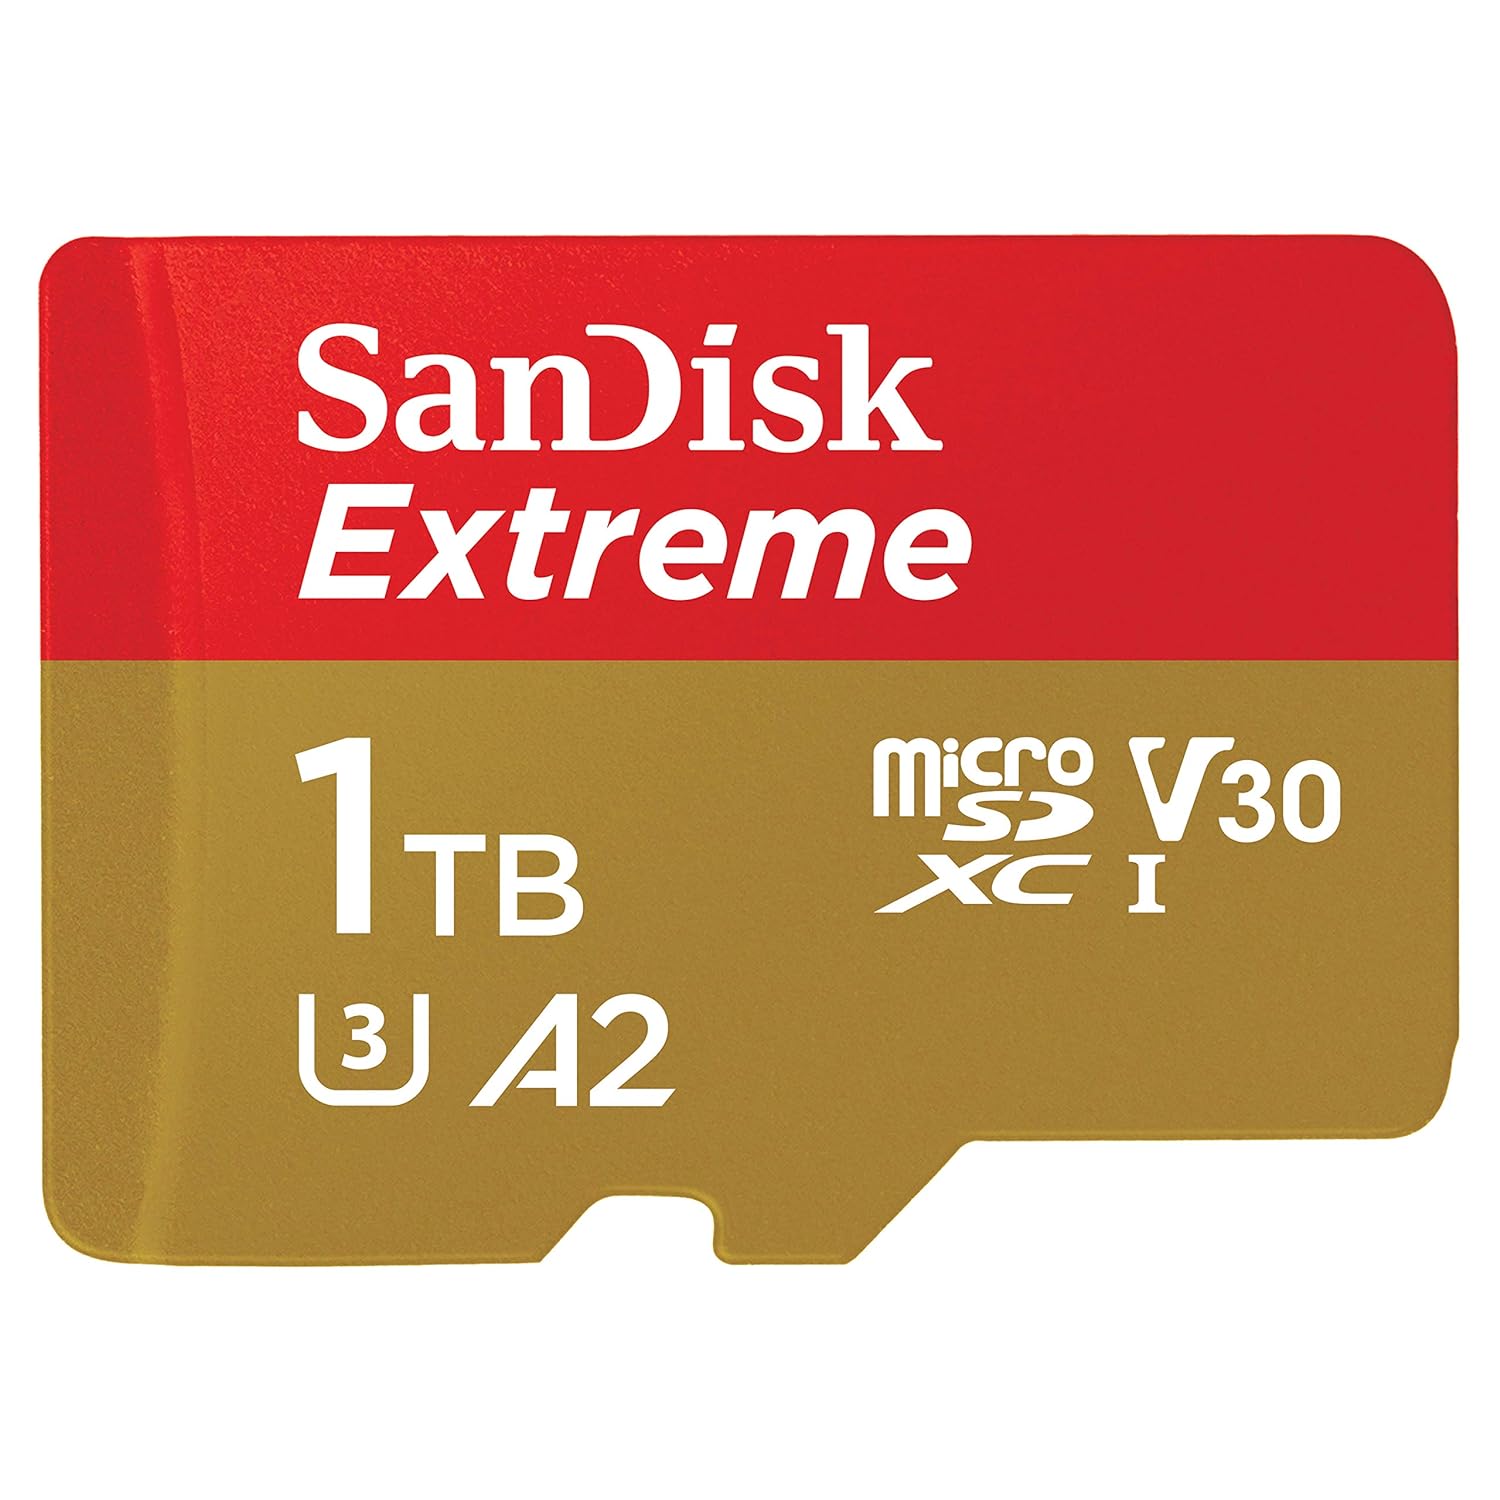 Sandisk A2 Extreme Micro SDHC Class 10 (190 MBPS) 1 TB